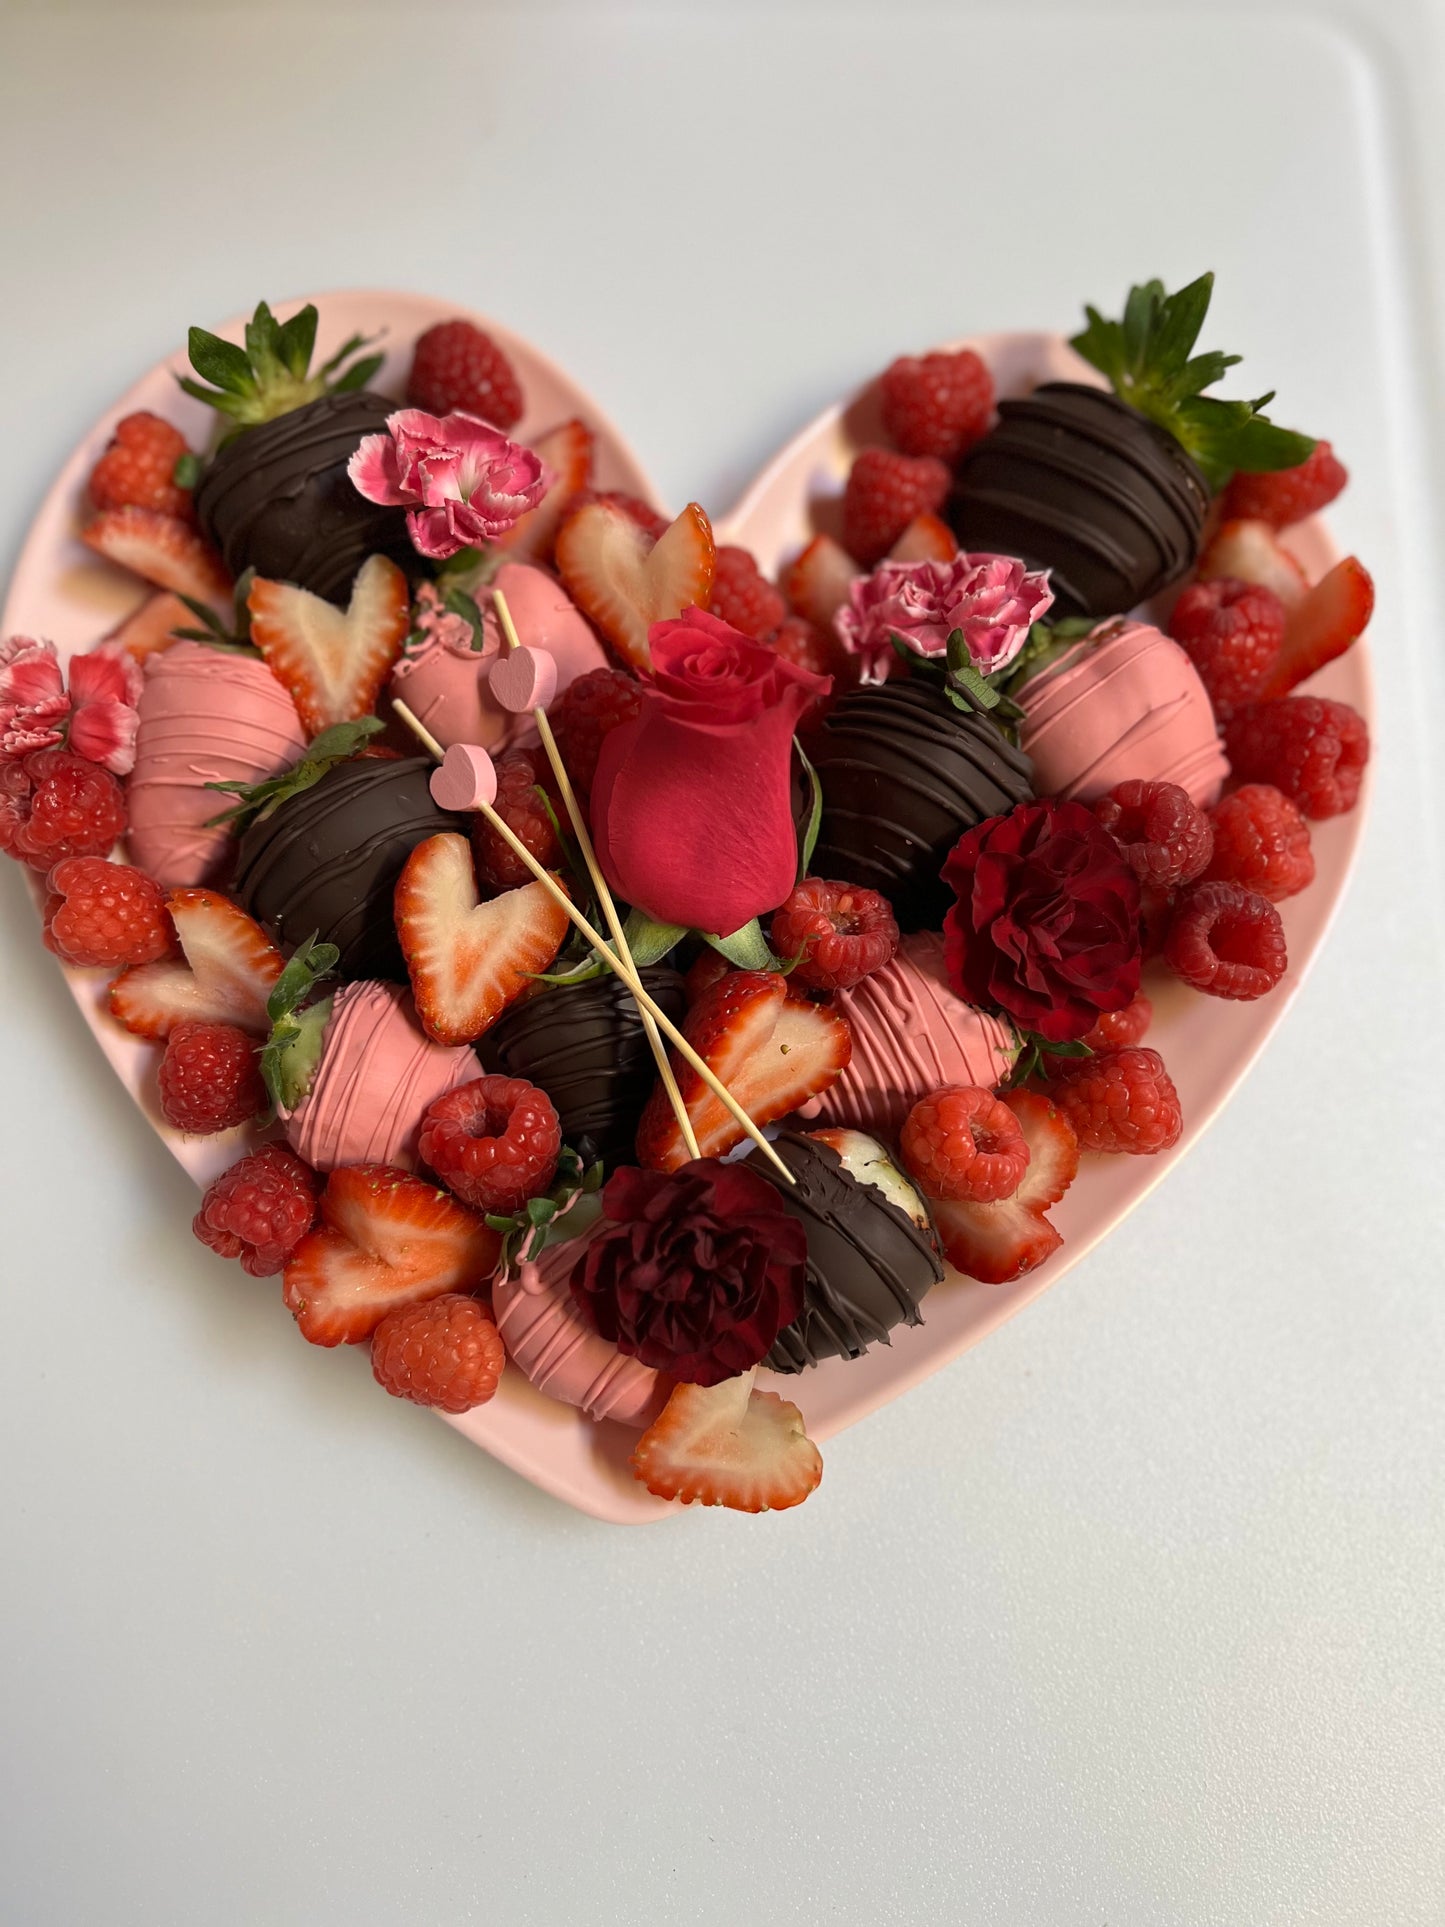 Chocolate Covered Strawberries + Berries (Put your p|u date + time in instruction box at checkout)